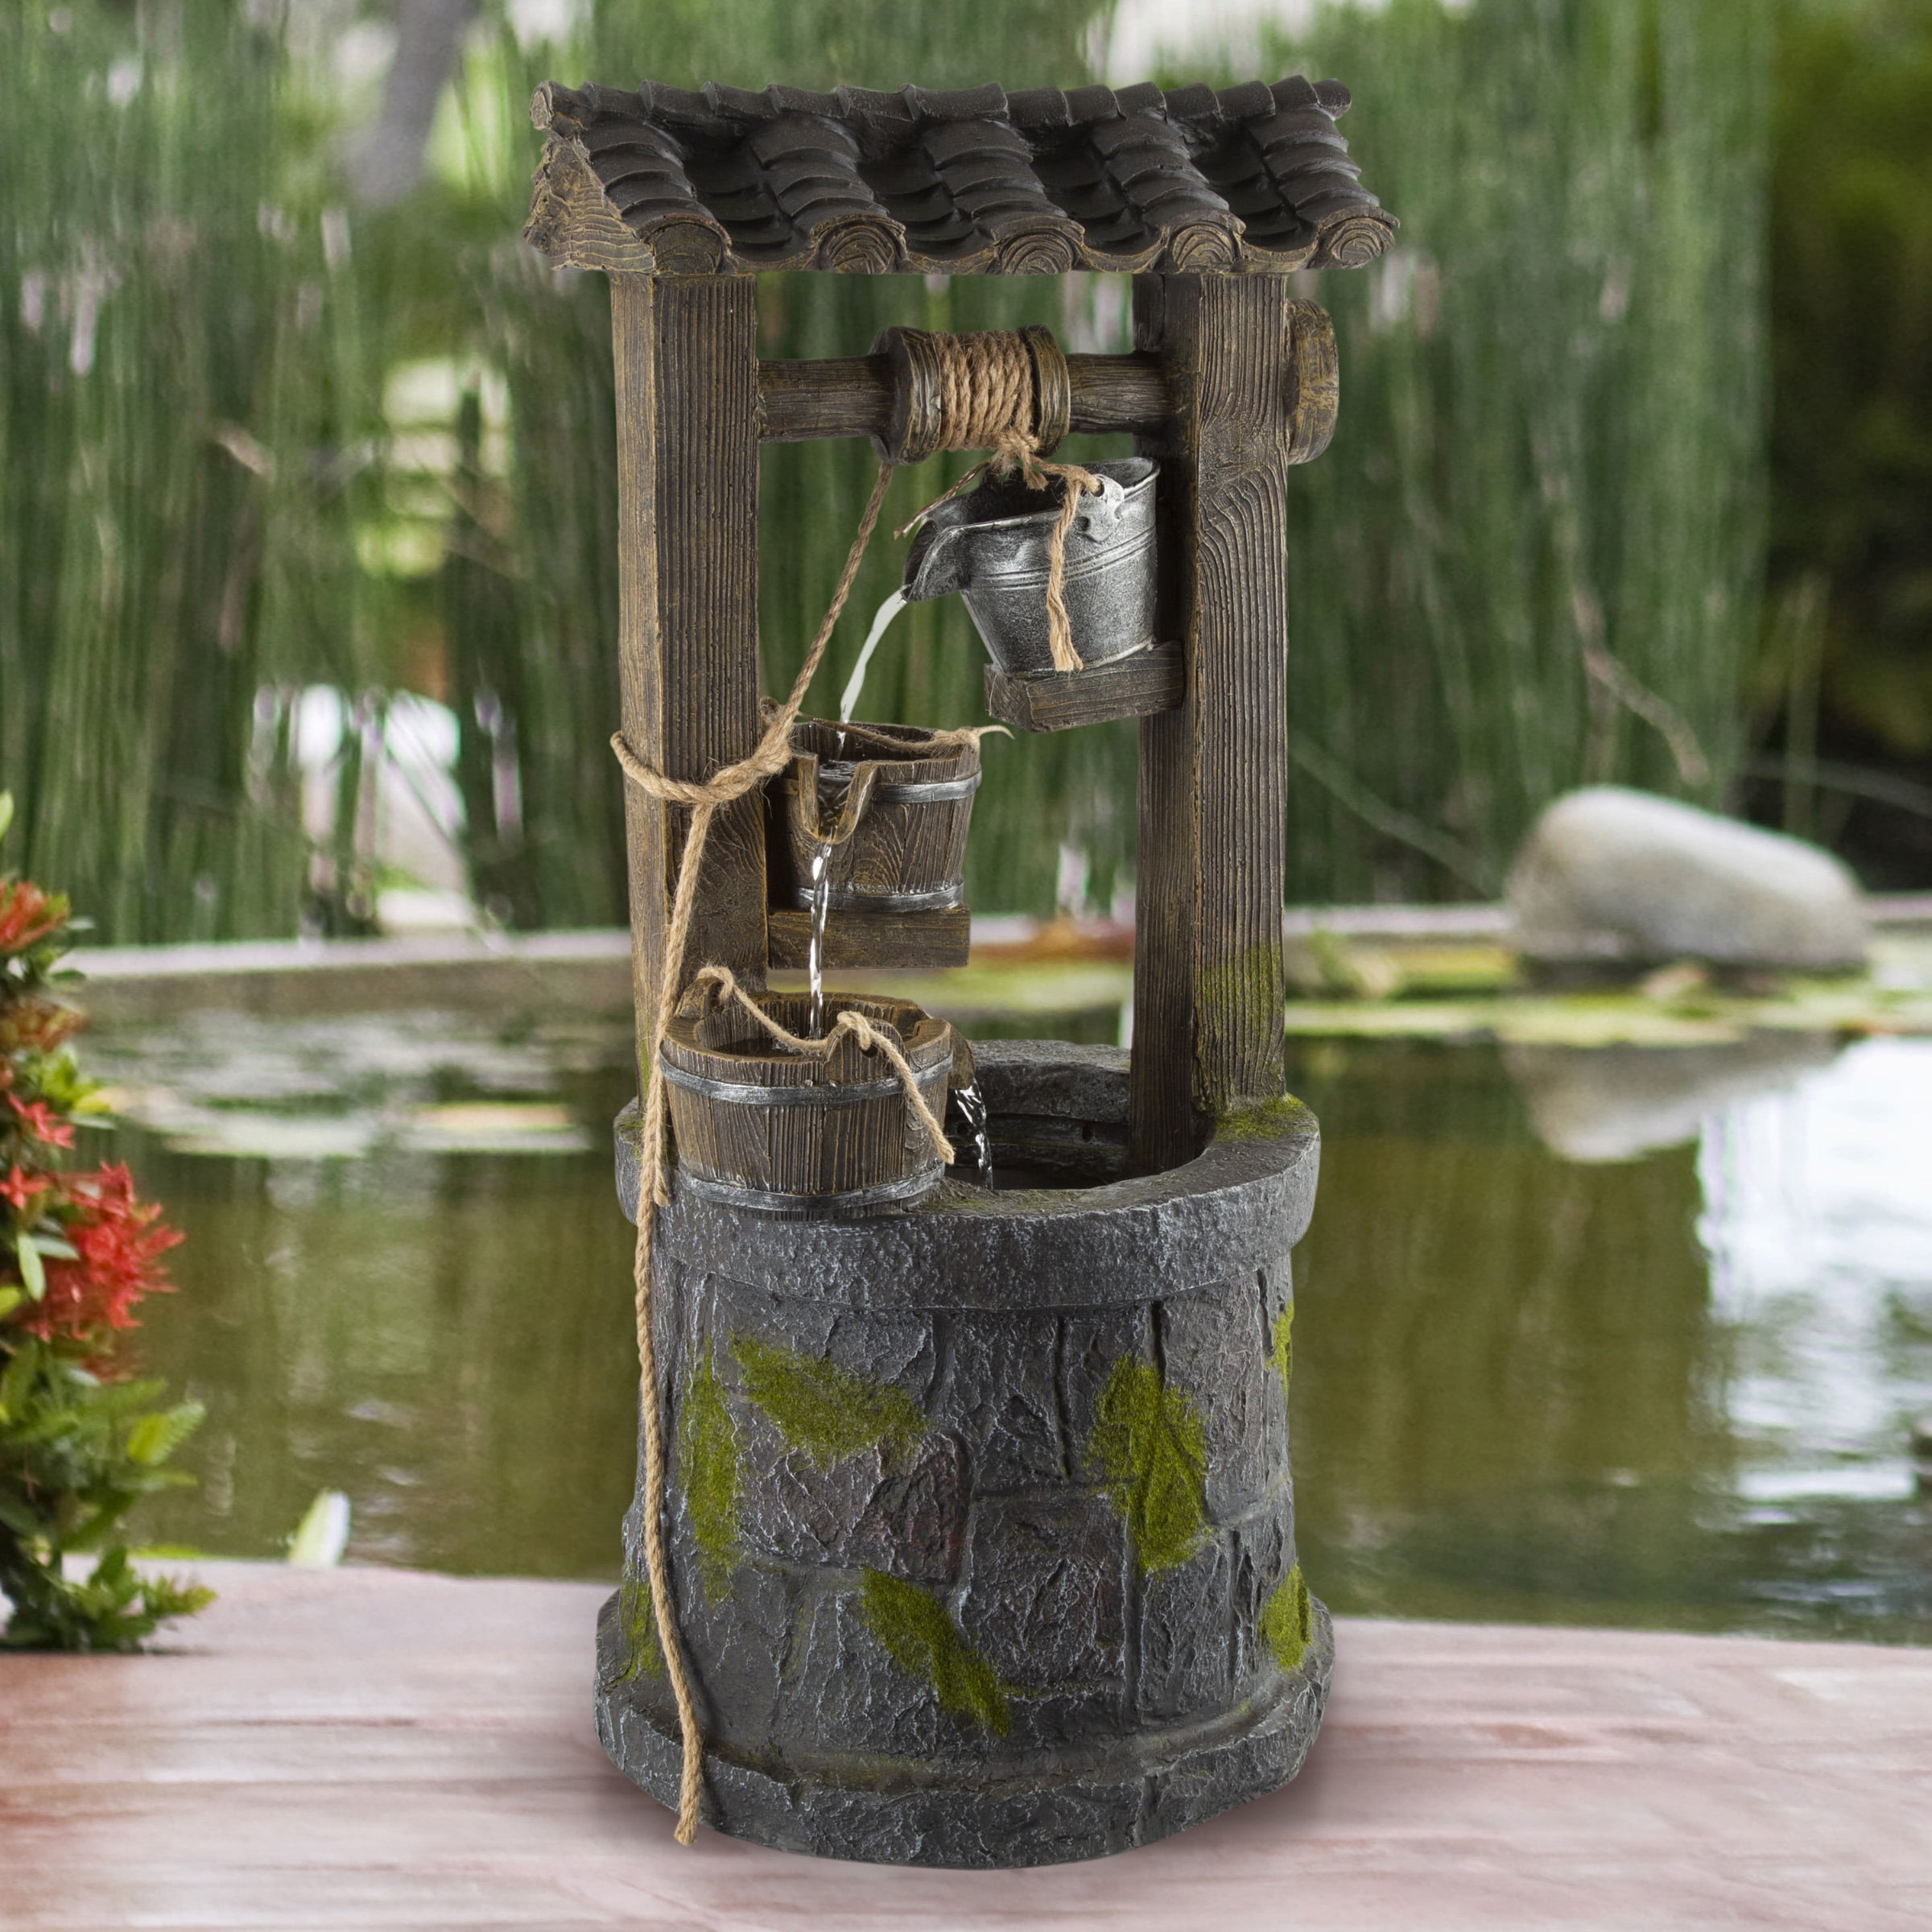 Wishing Well Water Feature Garden Ornament Large 69cm Tall NEW by Serenity